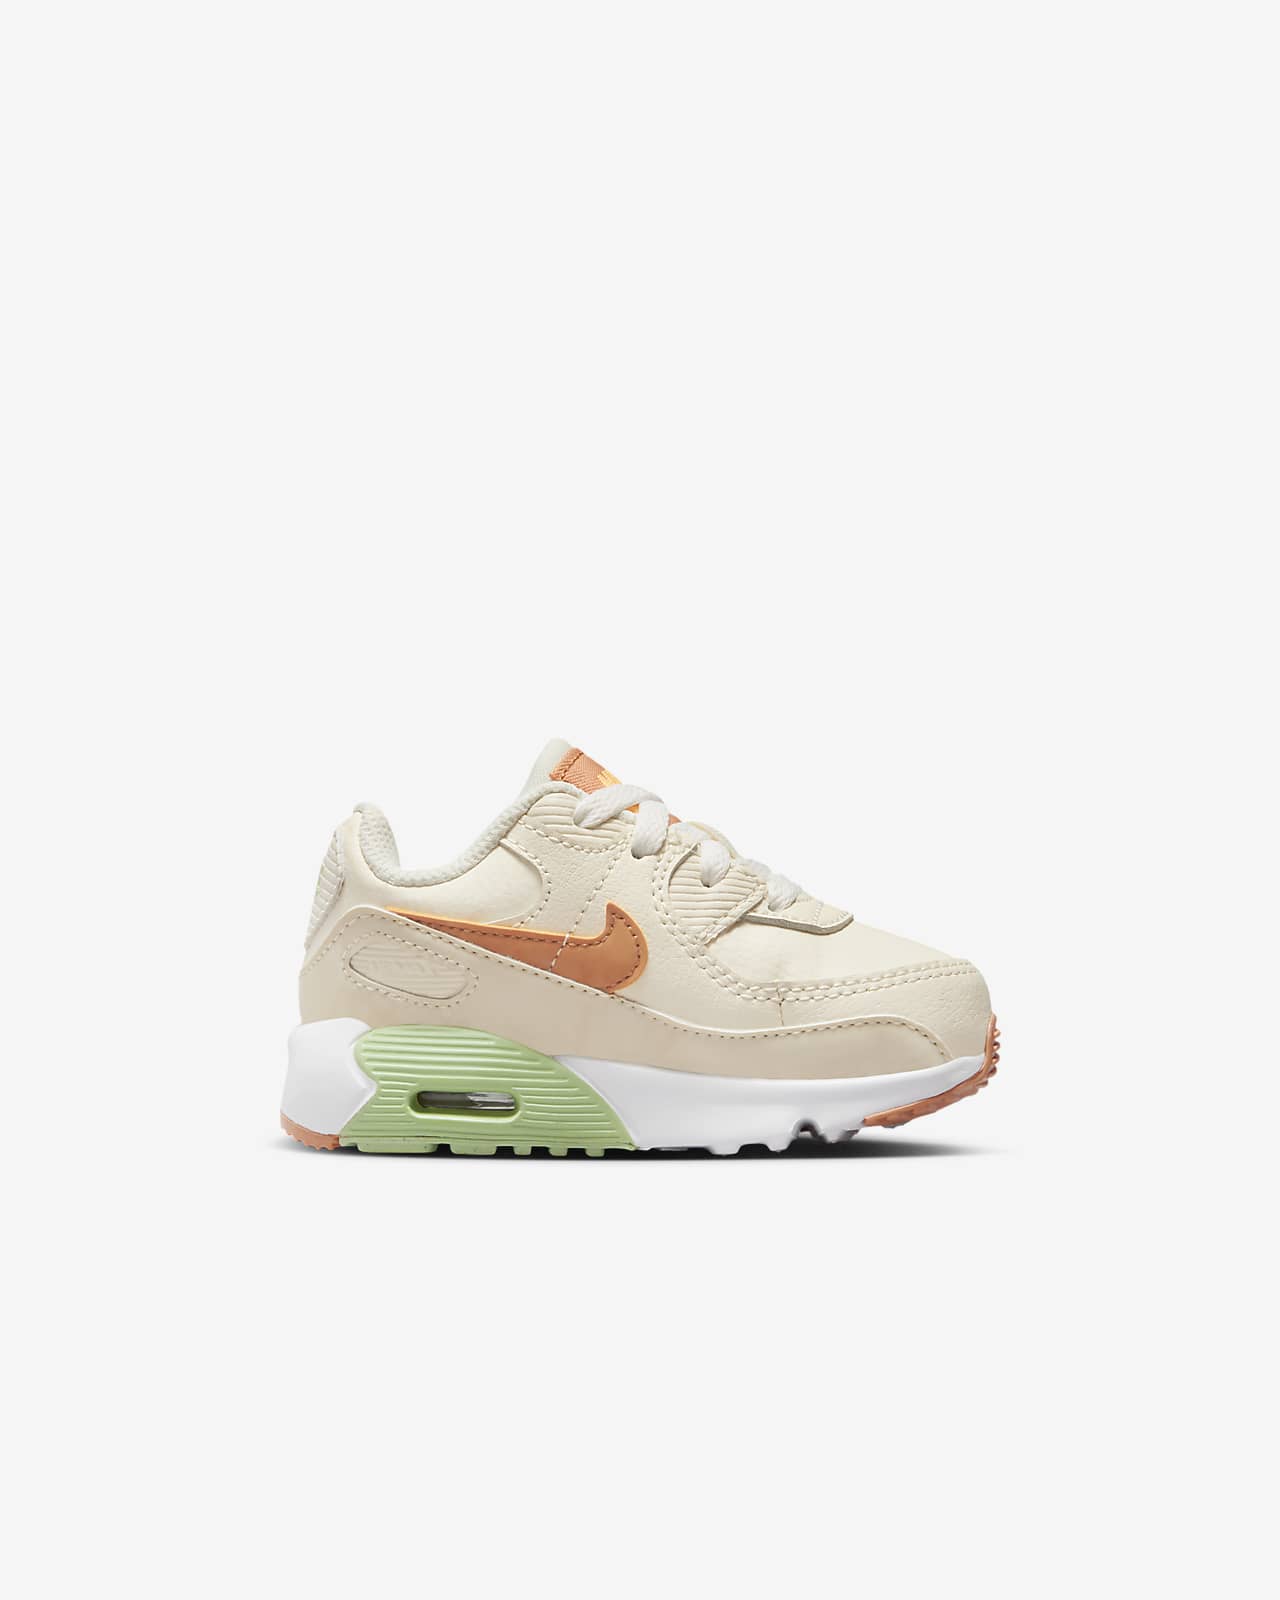 Nike Air Max 1 EasyOn Baby/Toddler Shoes in Brown, Size: 4C | DZ3309-102